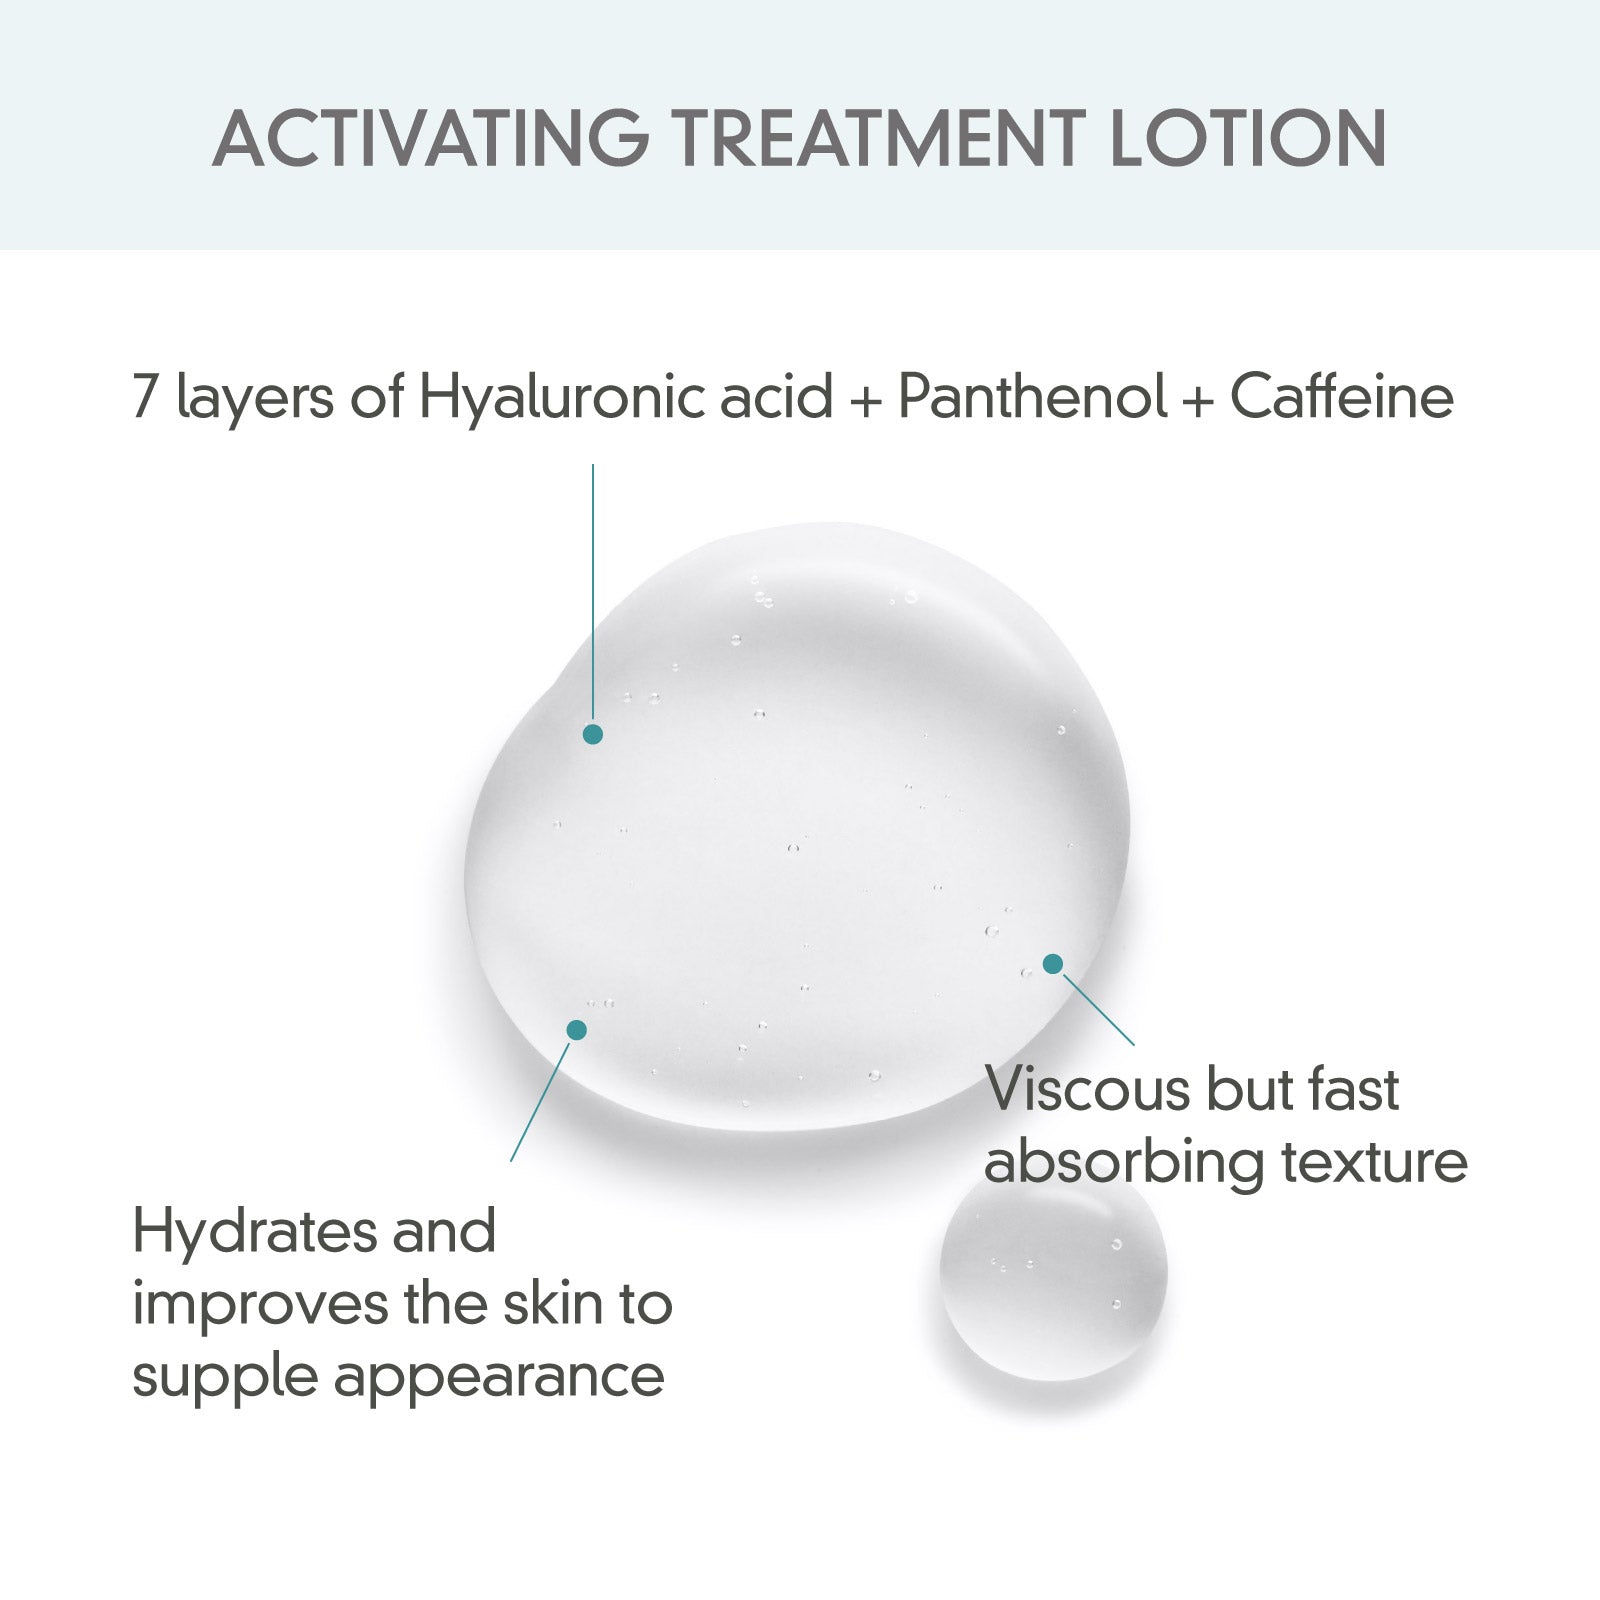 Activating Treatment Lotion Travel size (15ml) - Rovectin Skin Essentials